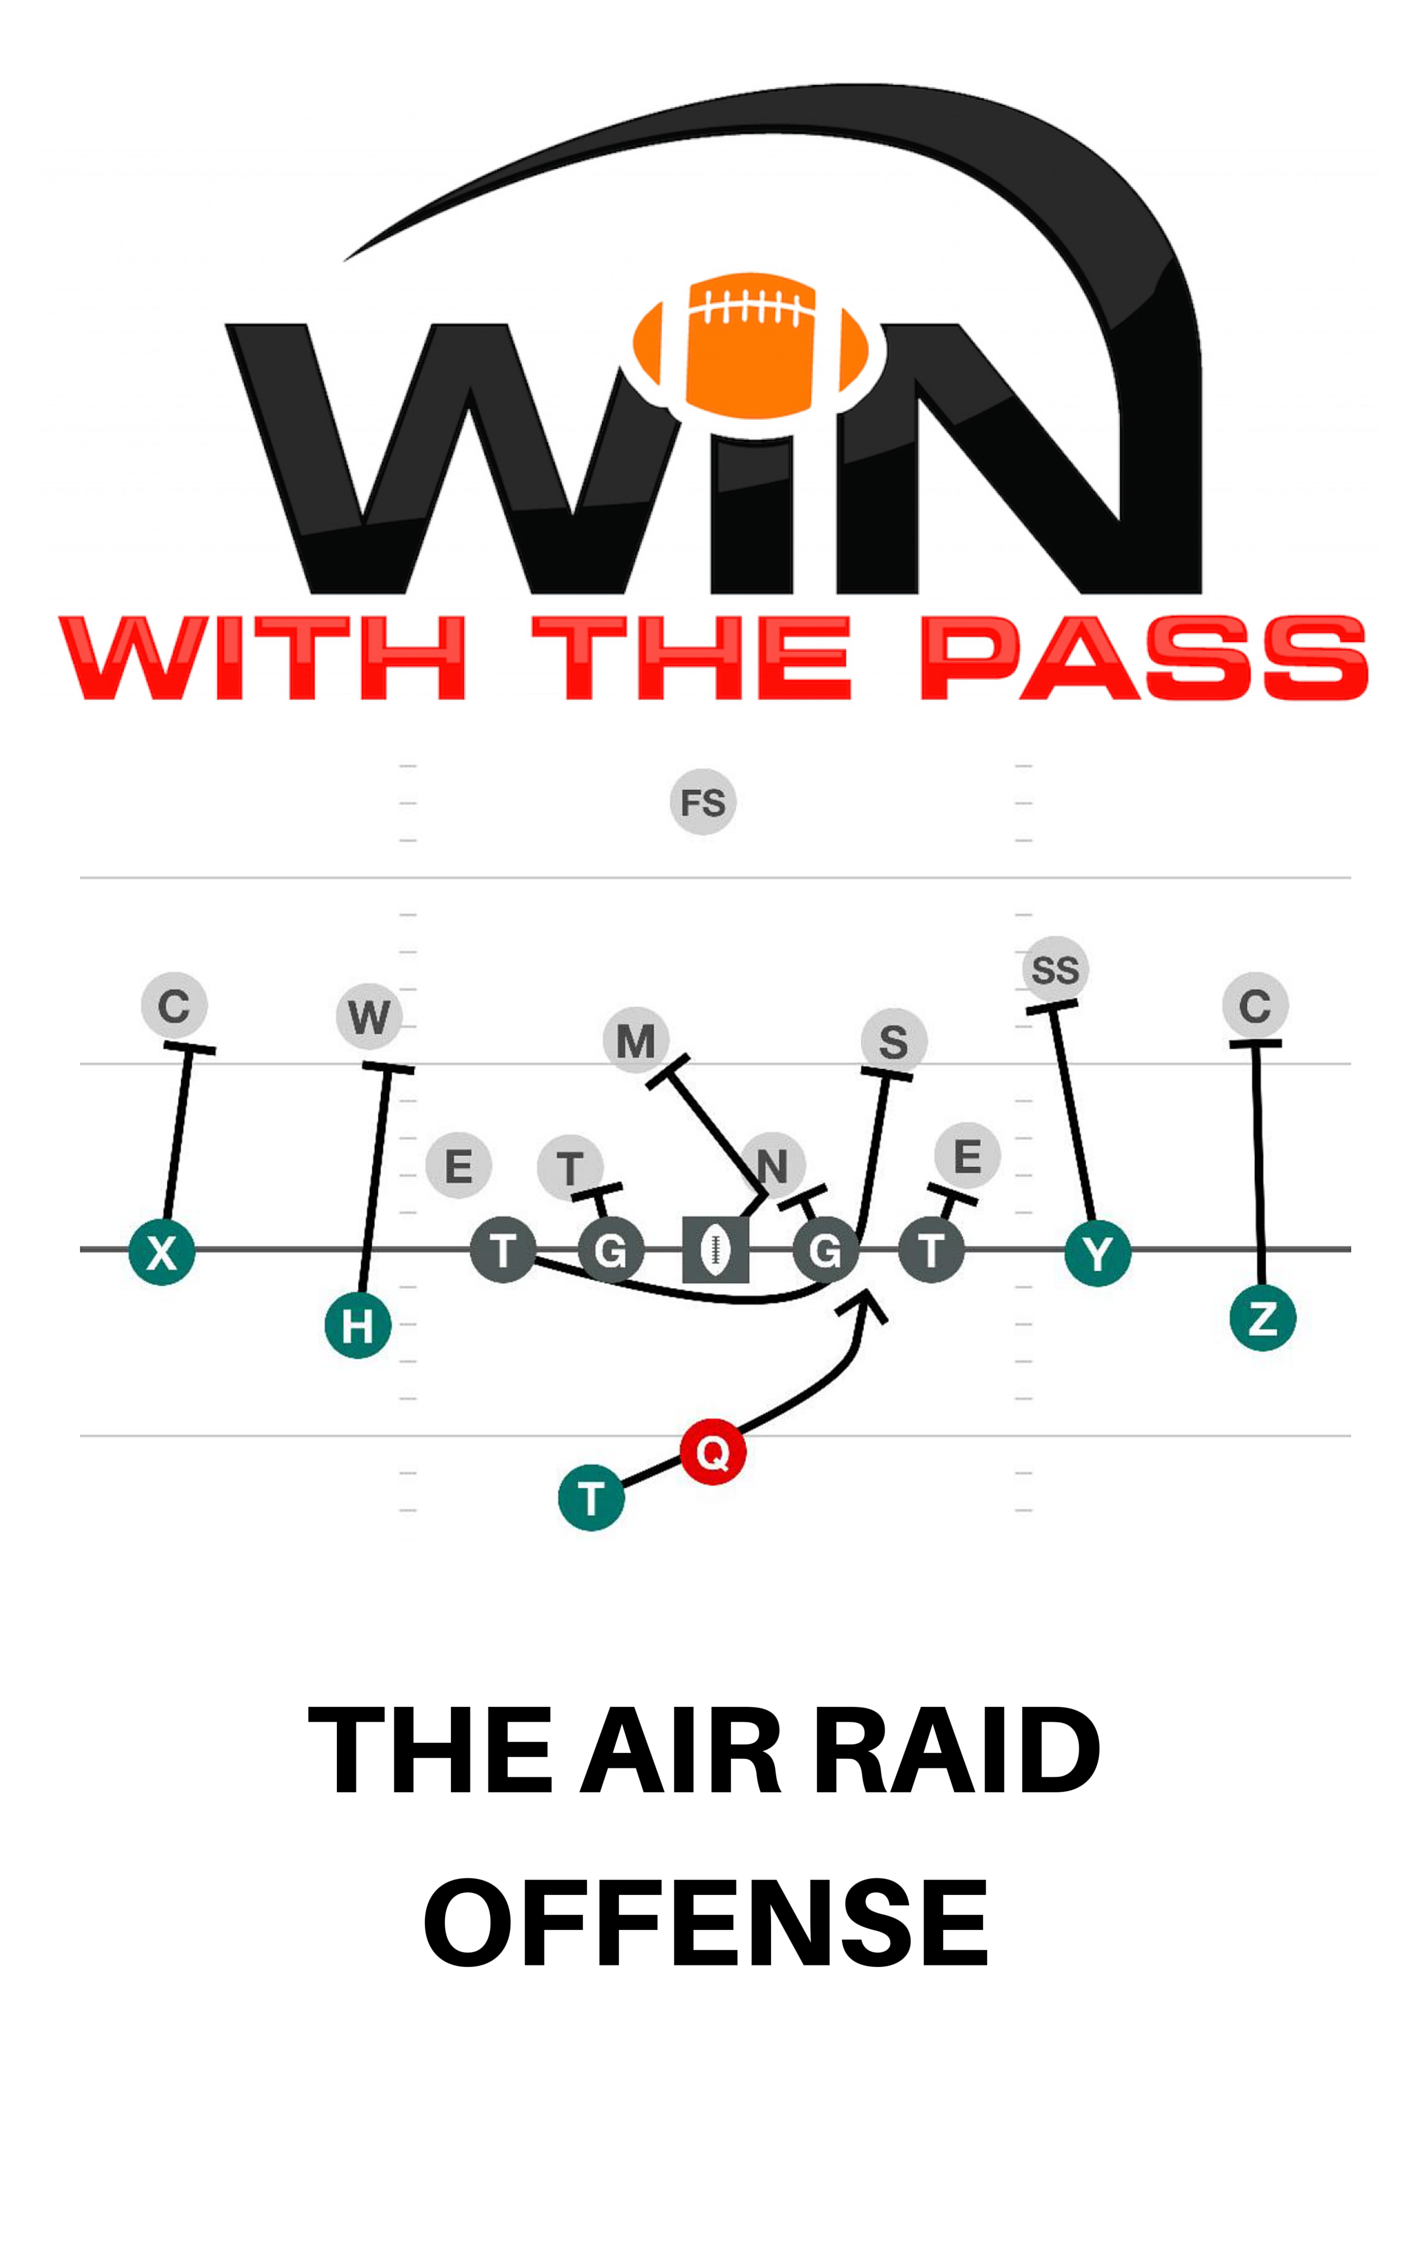 THE SPREAD RUNNING GAME